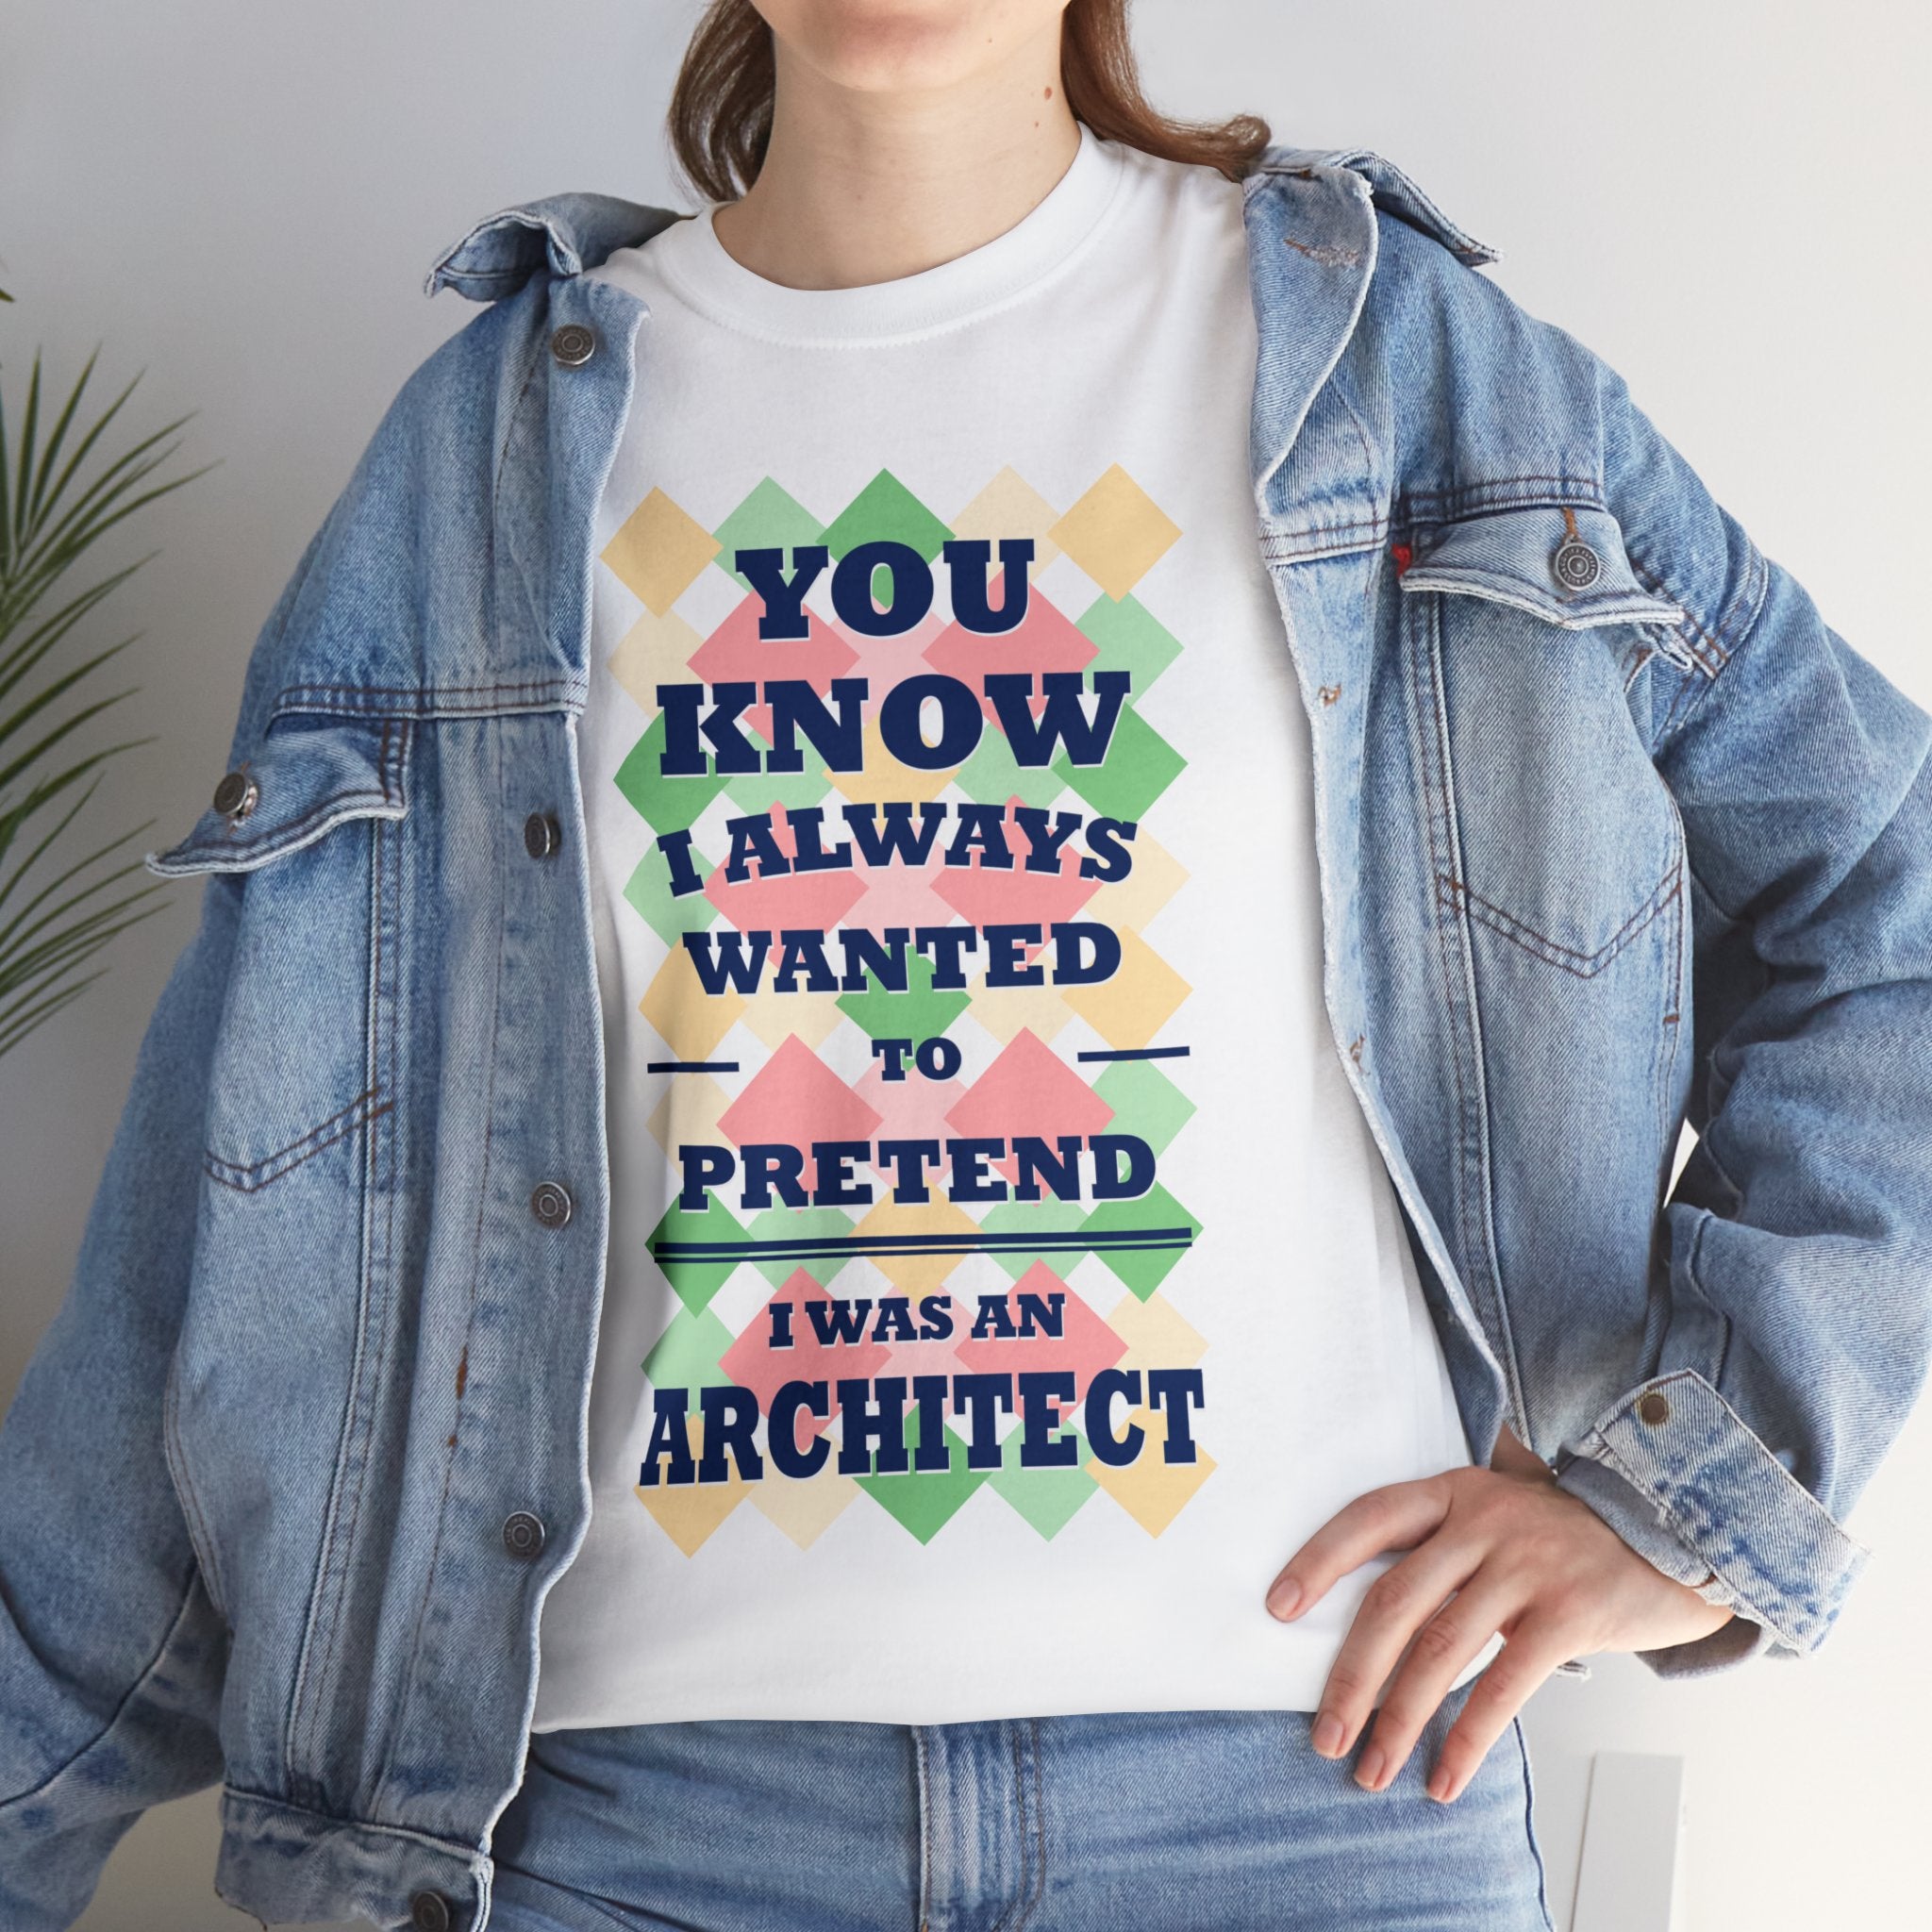 You Know I Always Wanted to Pretend I Was an Architect T-Shirt